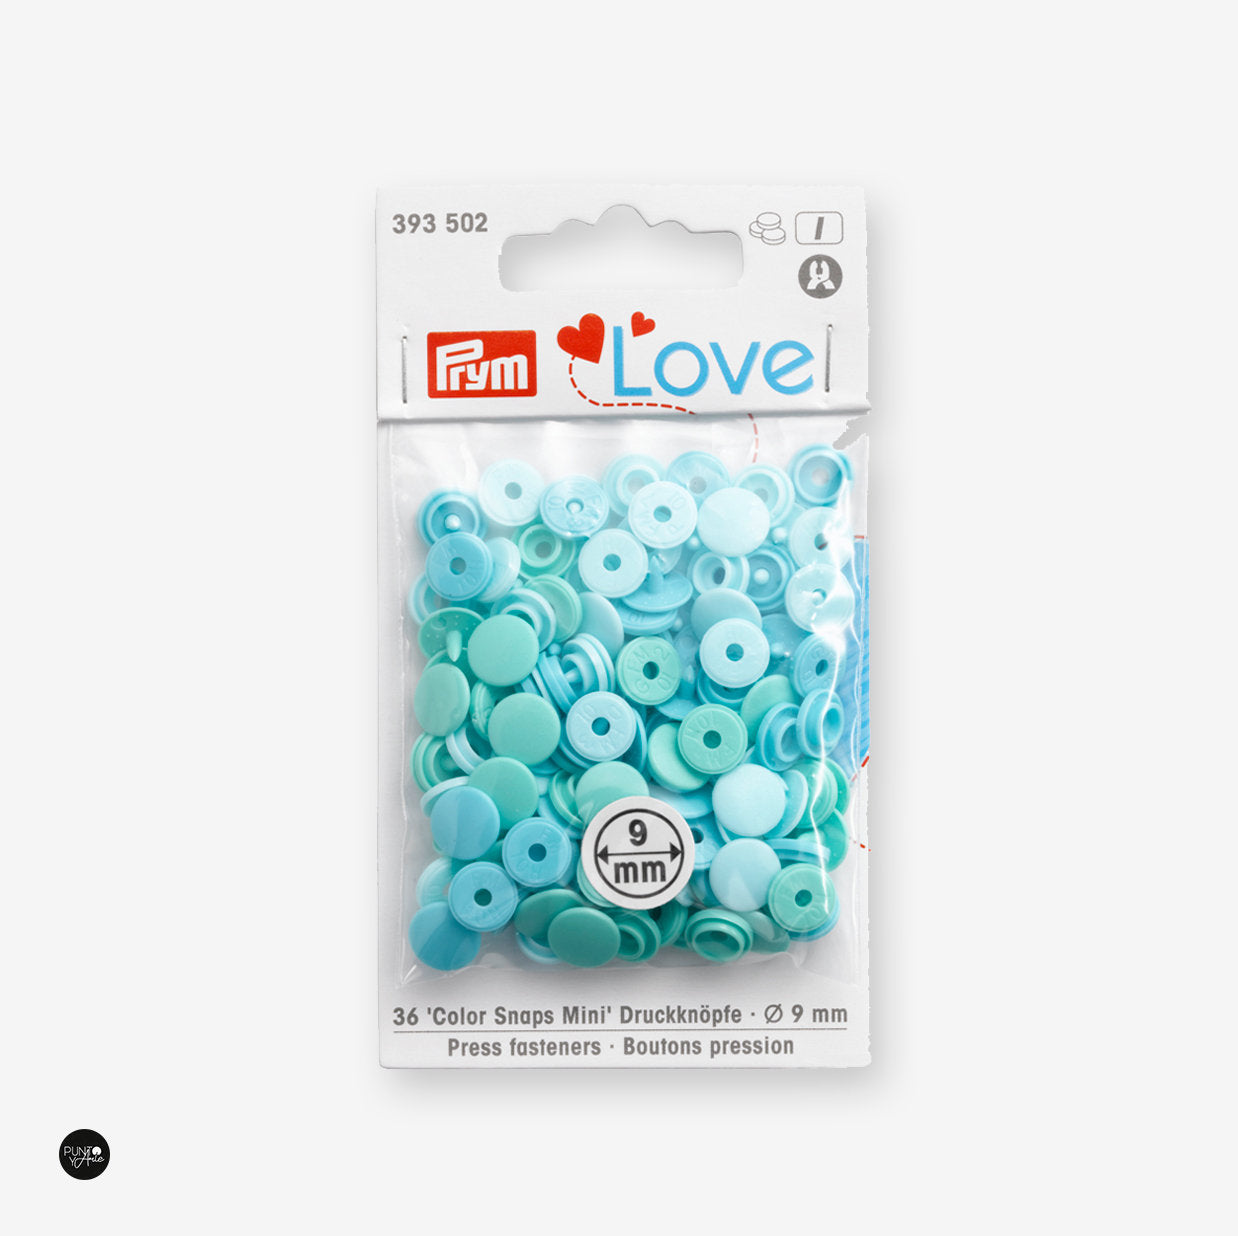 Press Buttons Or Snaps 9 mm - Prym Love 393502